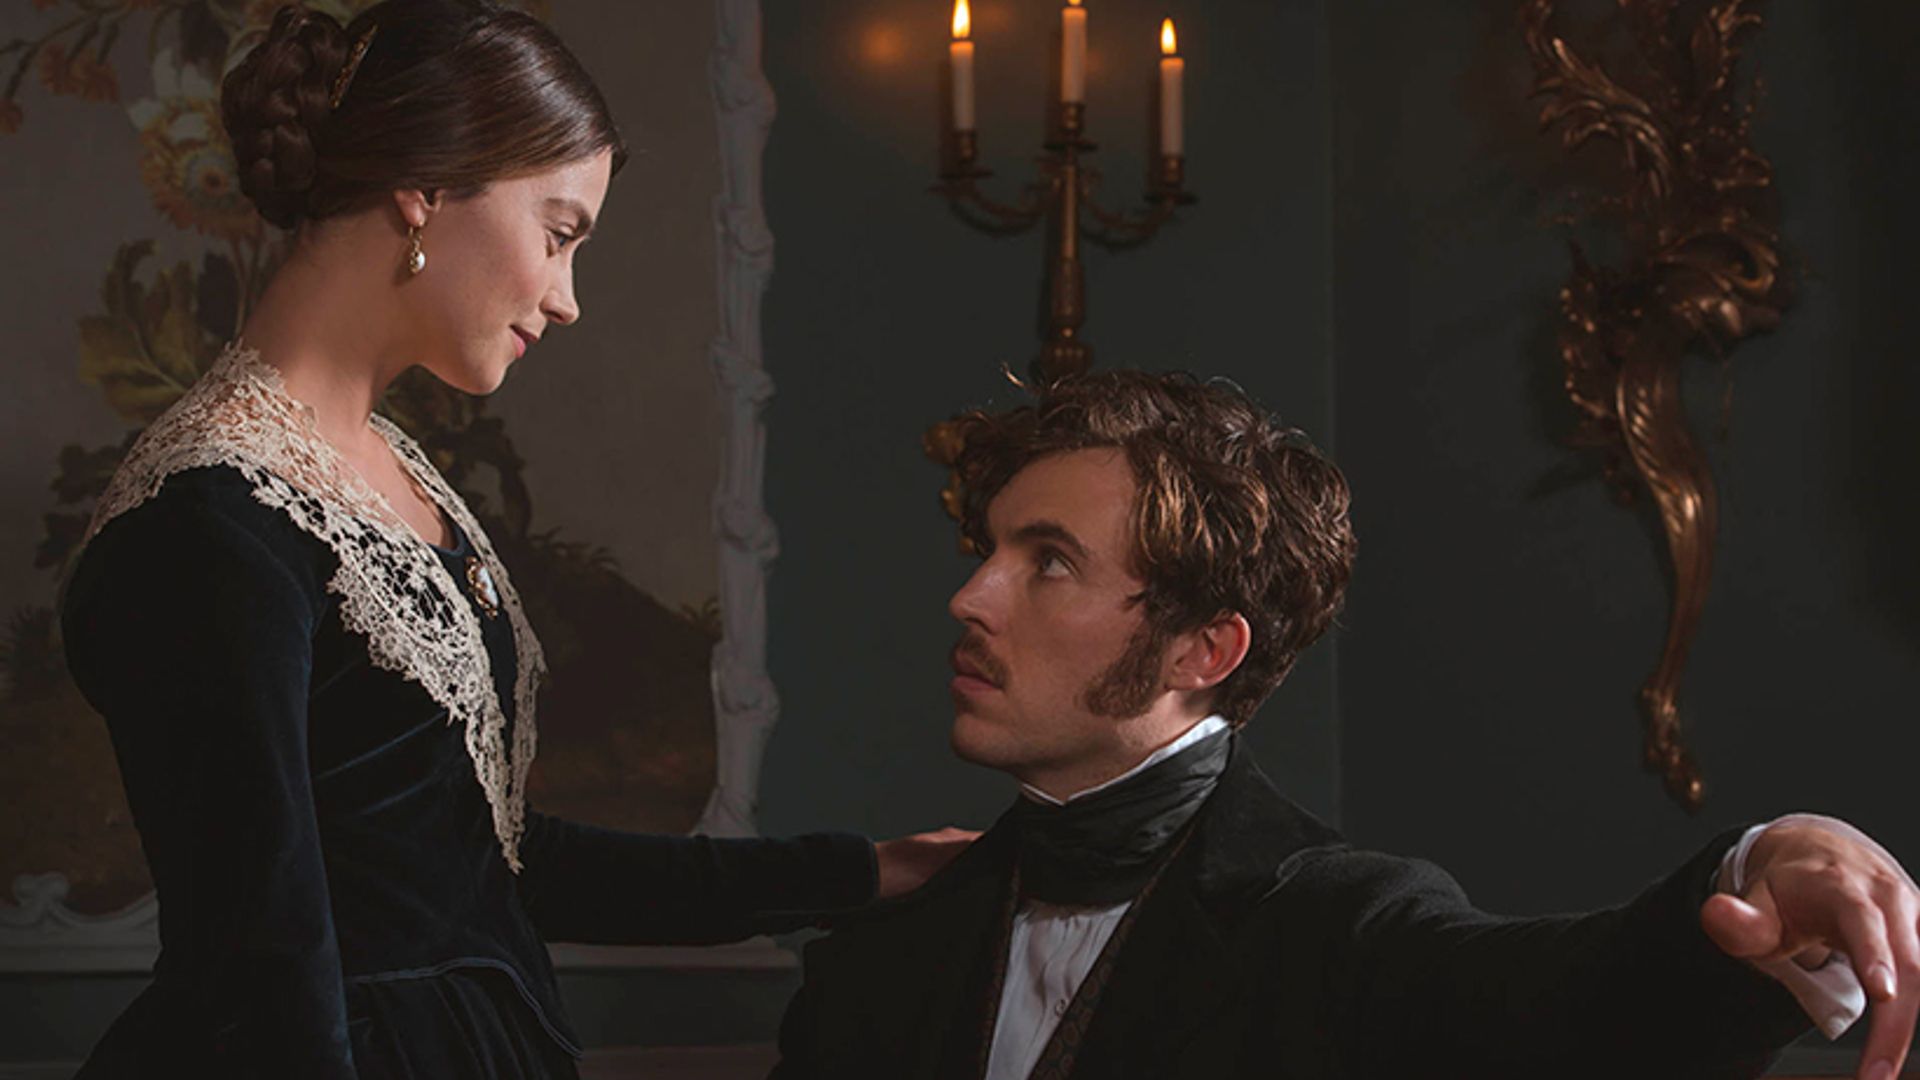 Victoria screenwriter reveals details of series 3 and Christmas special